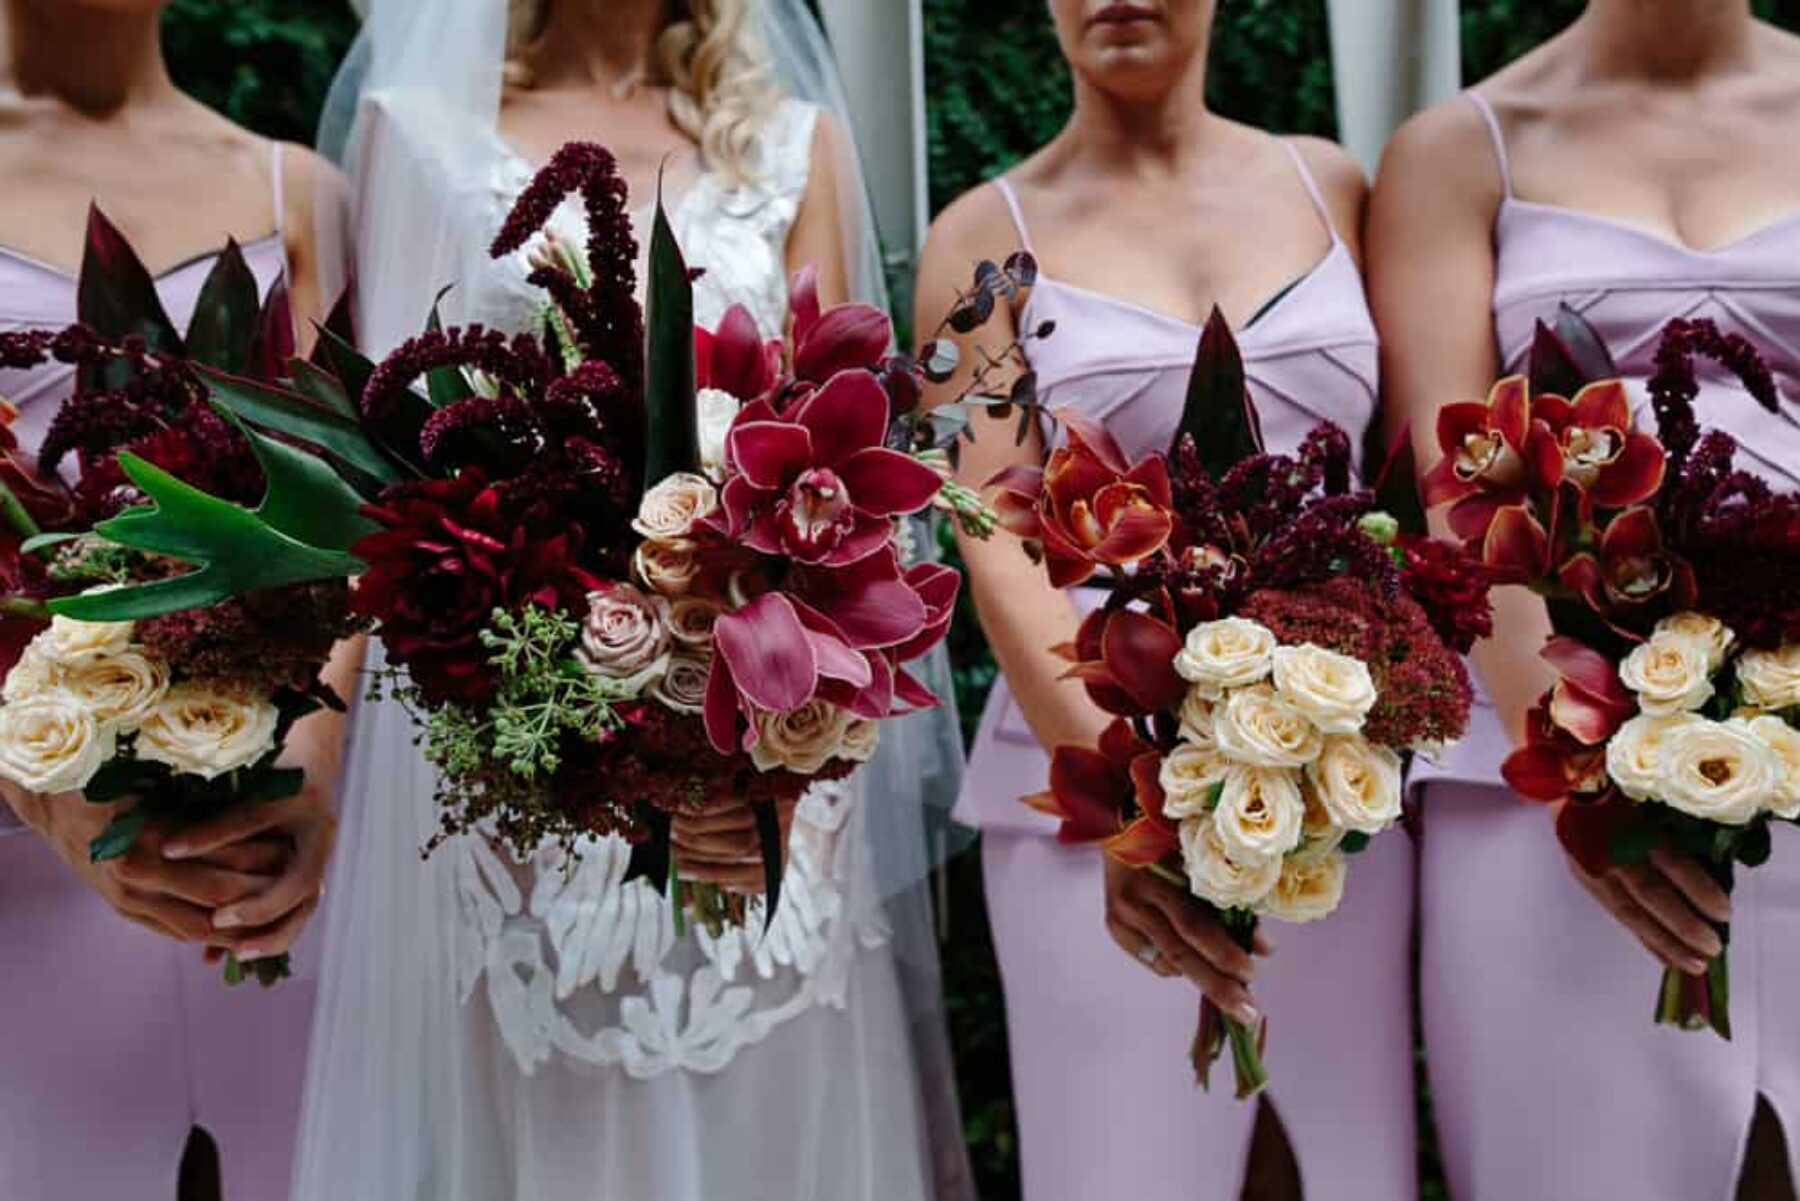 masarla bouquets with orchids roses and amaranth